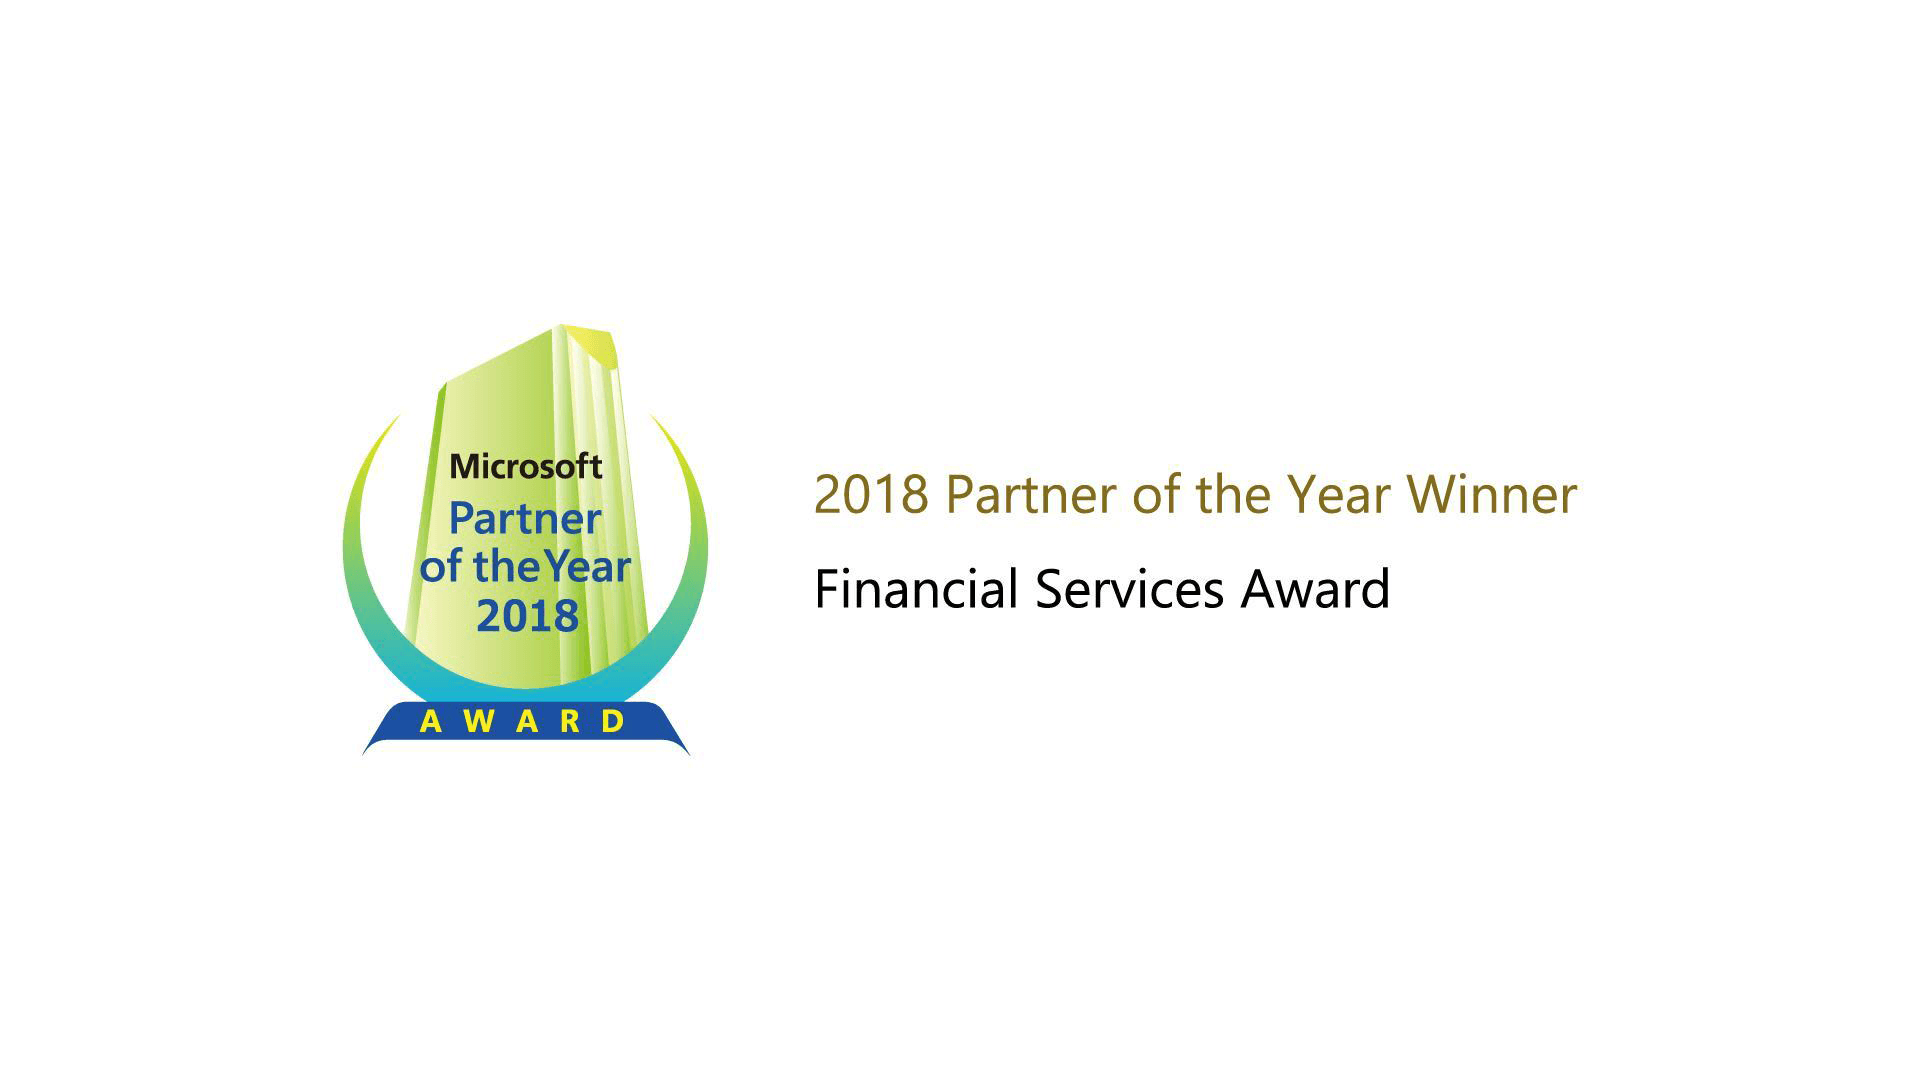 2018_0830_001_pressrelease_microsoft_2018_partner_of_the_year_winner_financial_services_award_001.png